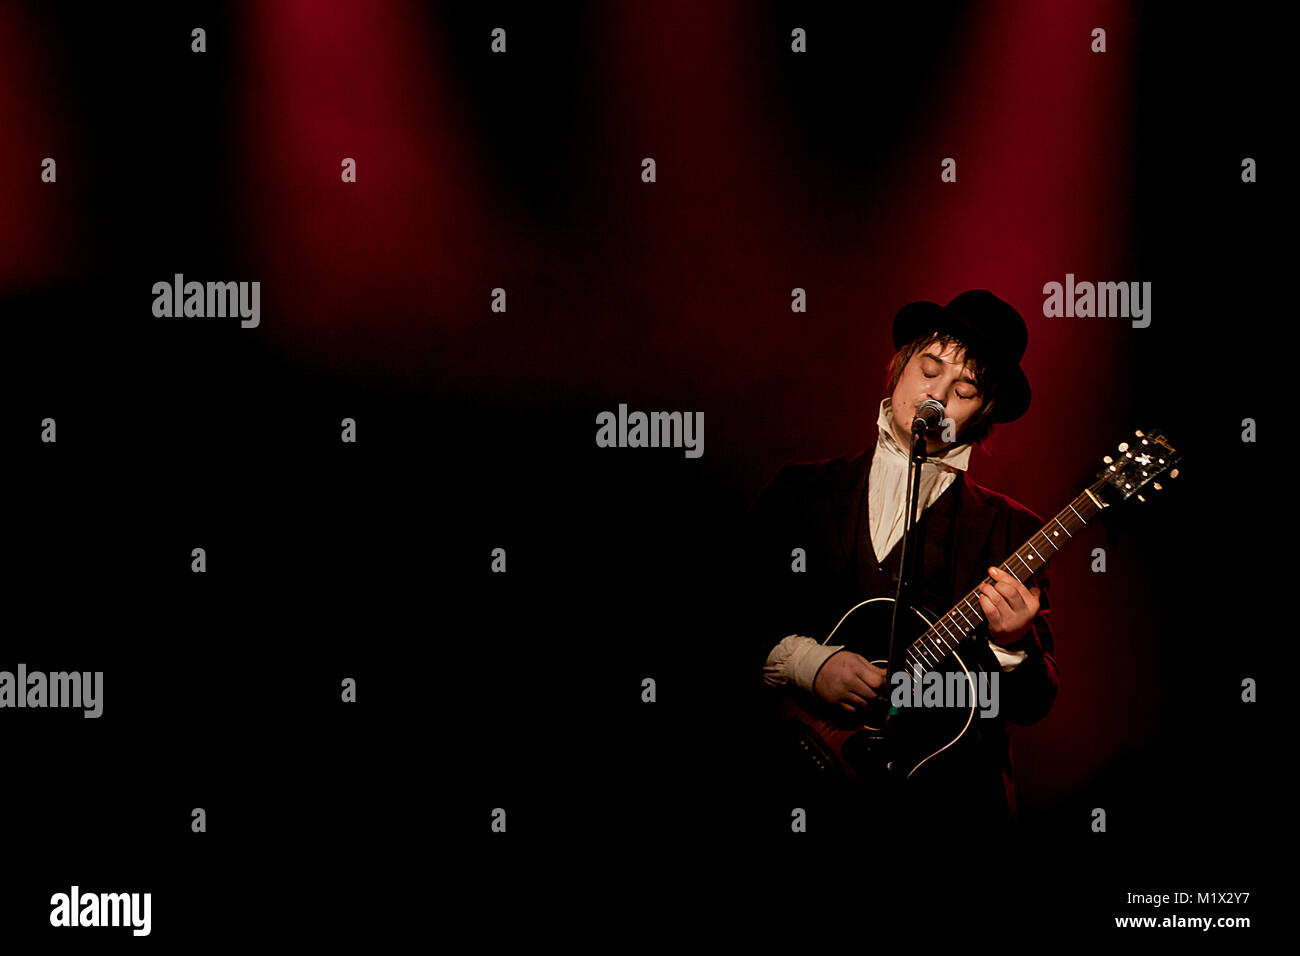 The English singer, songwriter and musician Pete Doherty performs a live concert at USF Verftet in Bergen. His music career began when he formed the band The Libertines but later he went on to become a solo artist. Norway, 30/03 2011. Stock Photo